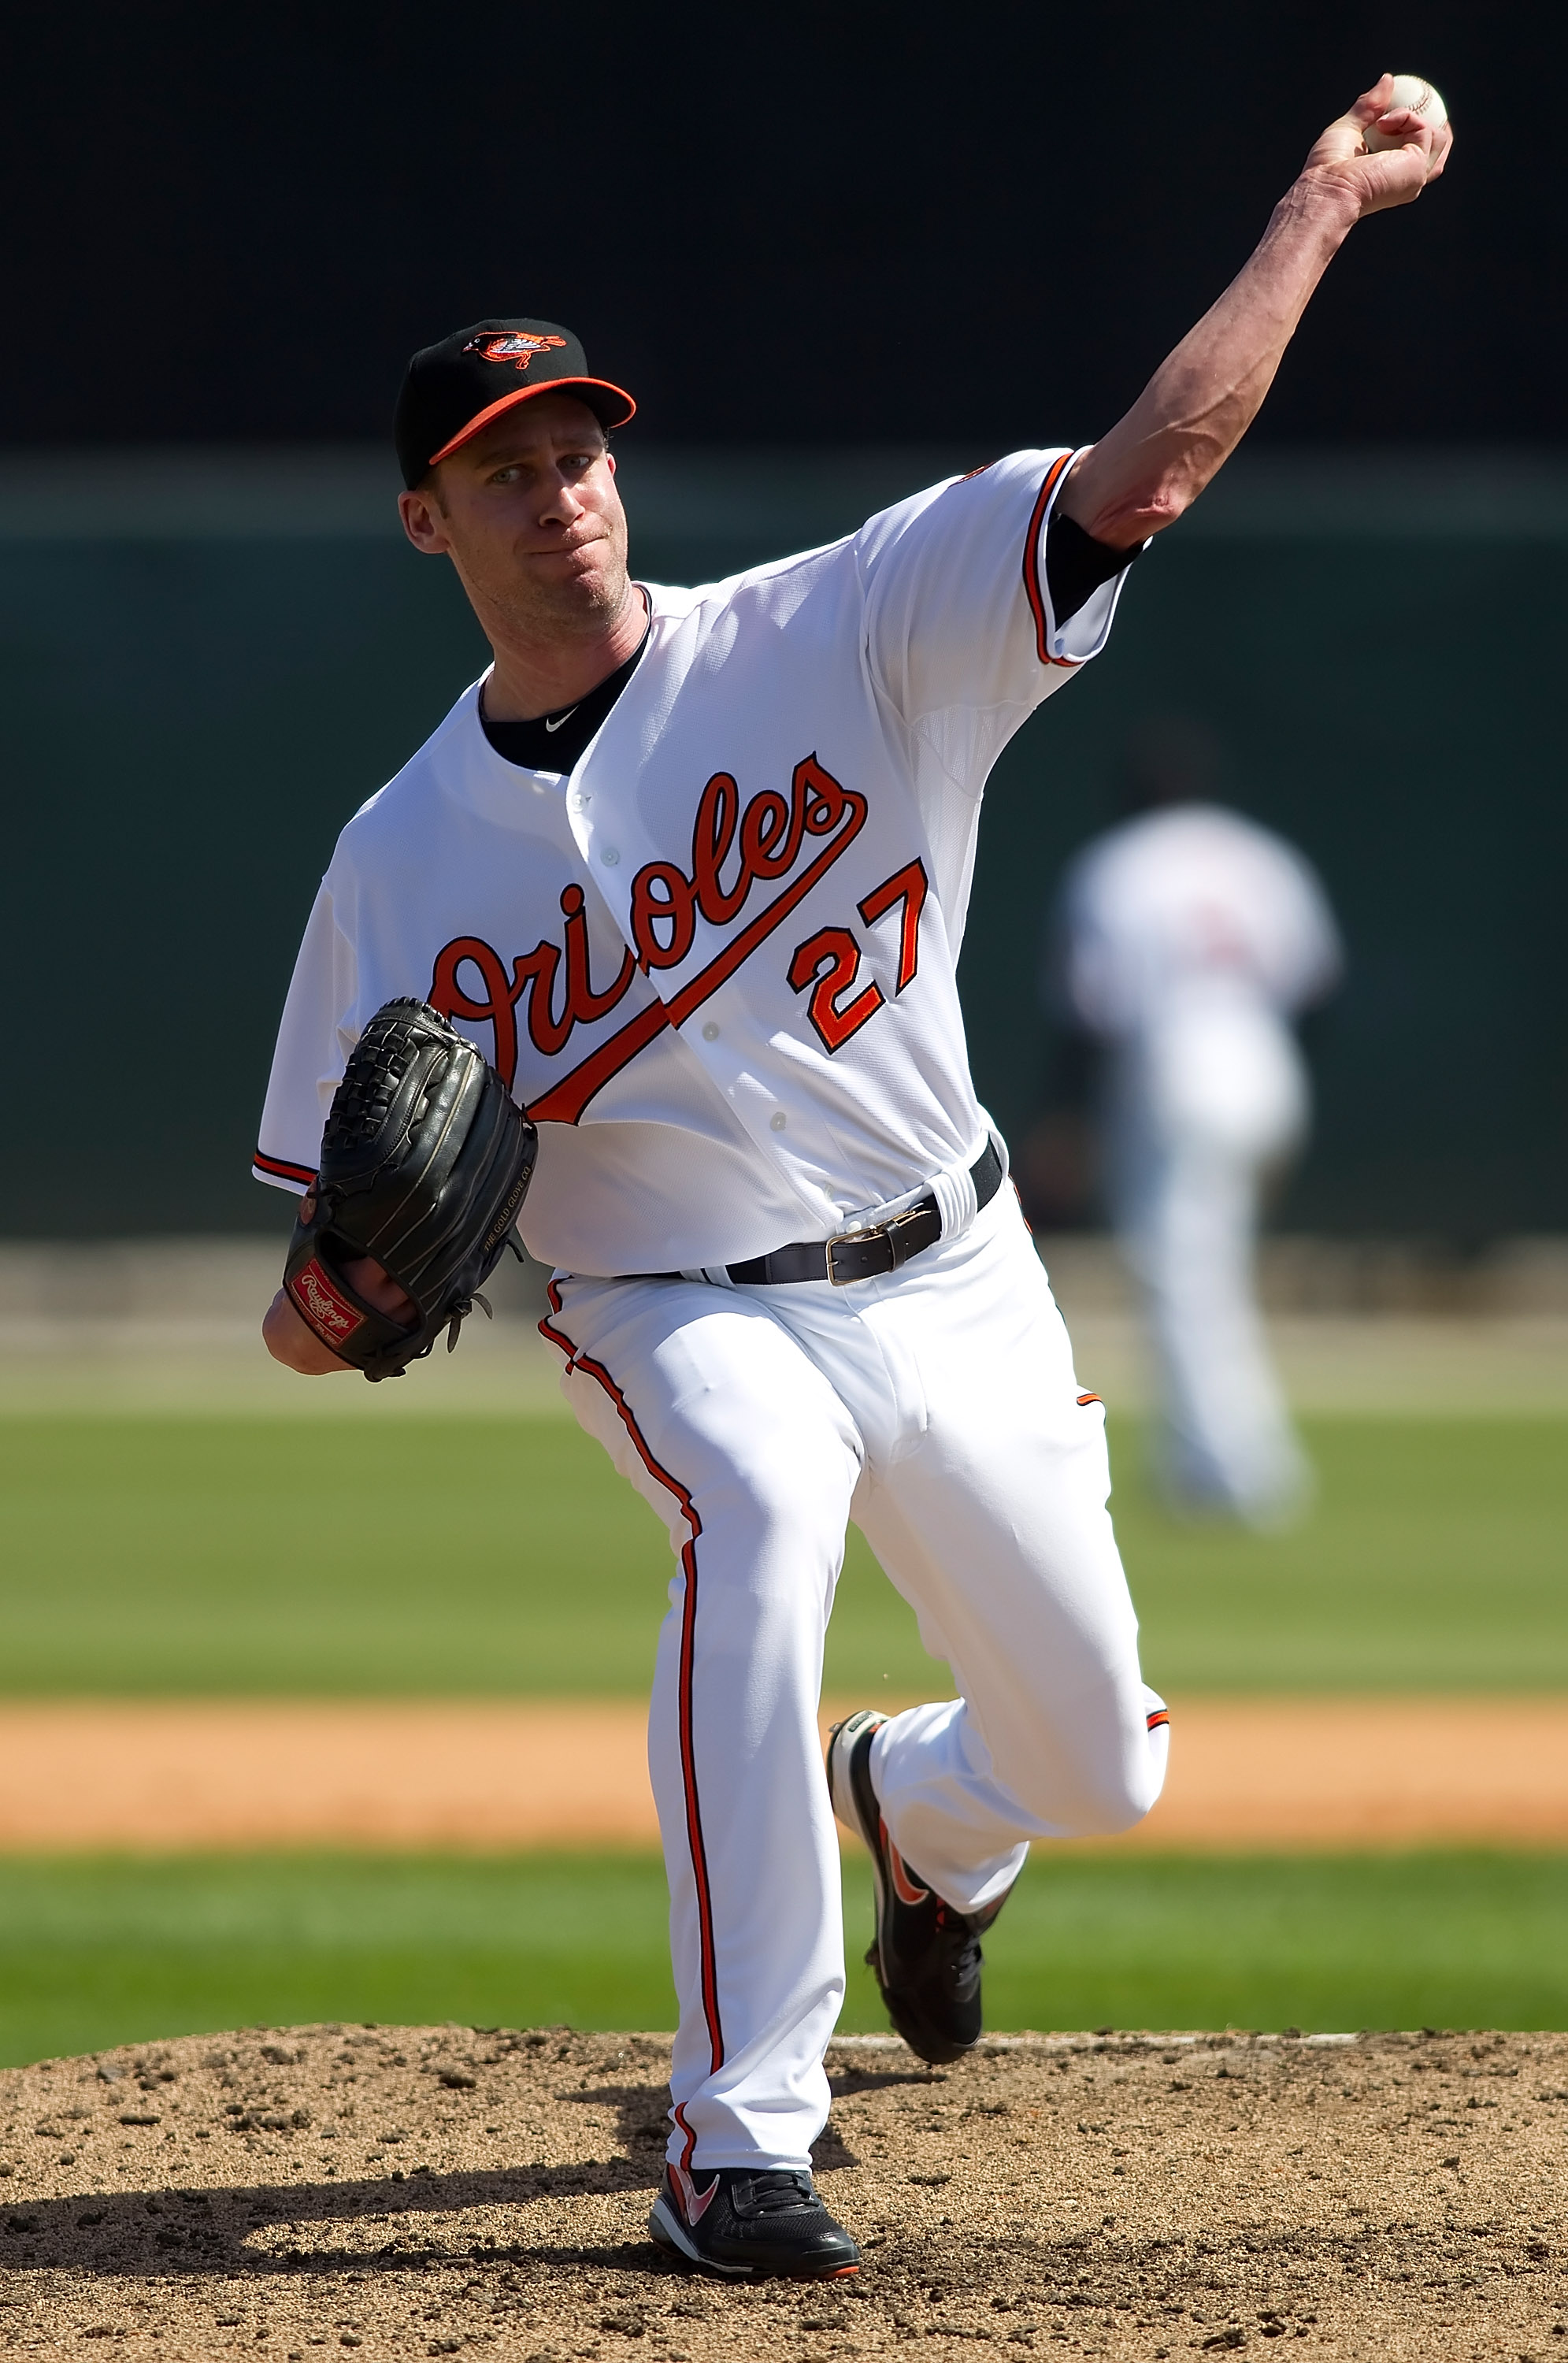 SARASOTA, FL - MARCH 07:  Pitcher Mark Hendrickson #27 of the Baltimore Orioles pitches against the Boston Red Sox during a Grapefruit League Spring Training Game at Ed Smith Stadium on March 7, 2010 in Sarasota, Florida.  (Photo by J. Meric/Getty Images)